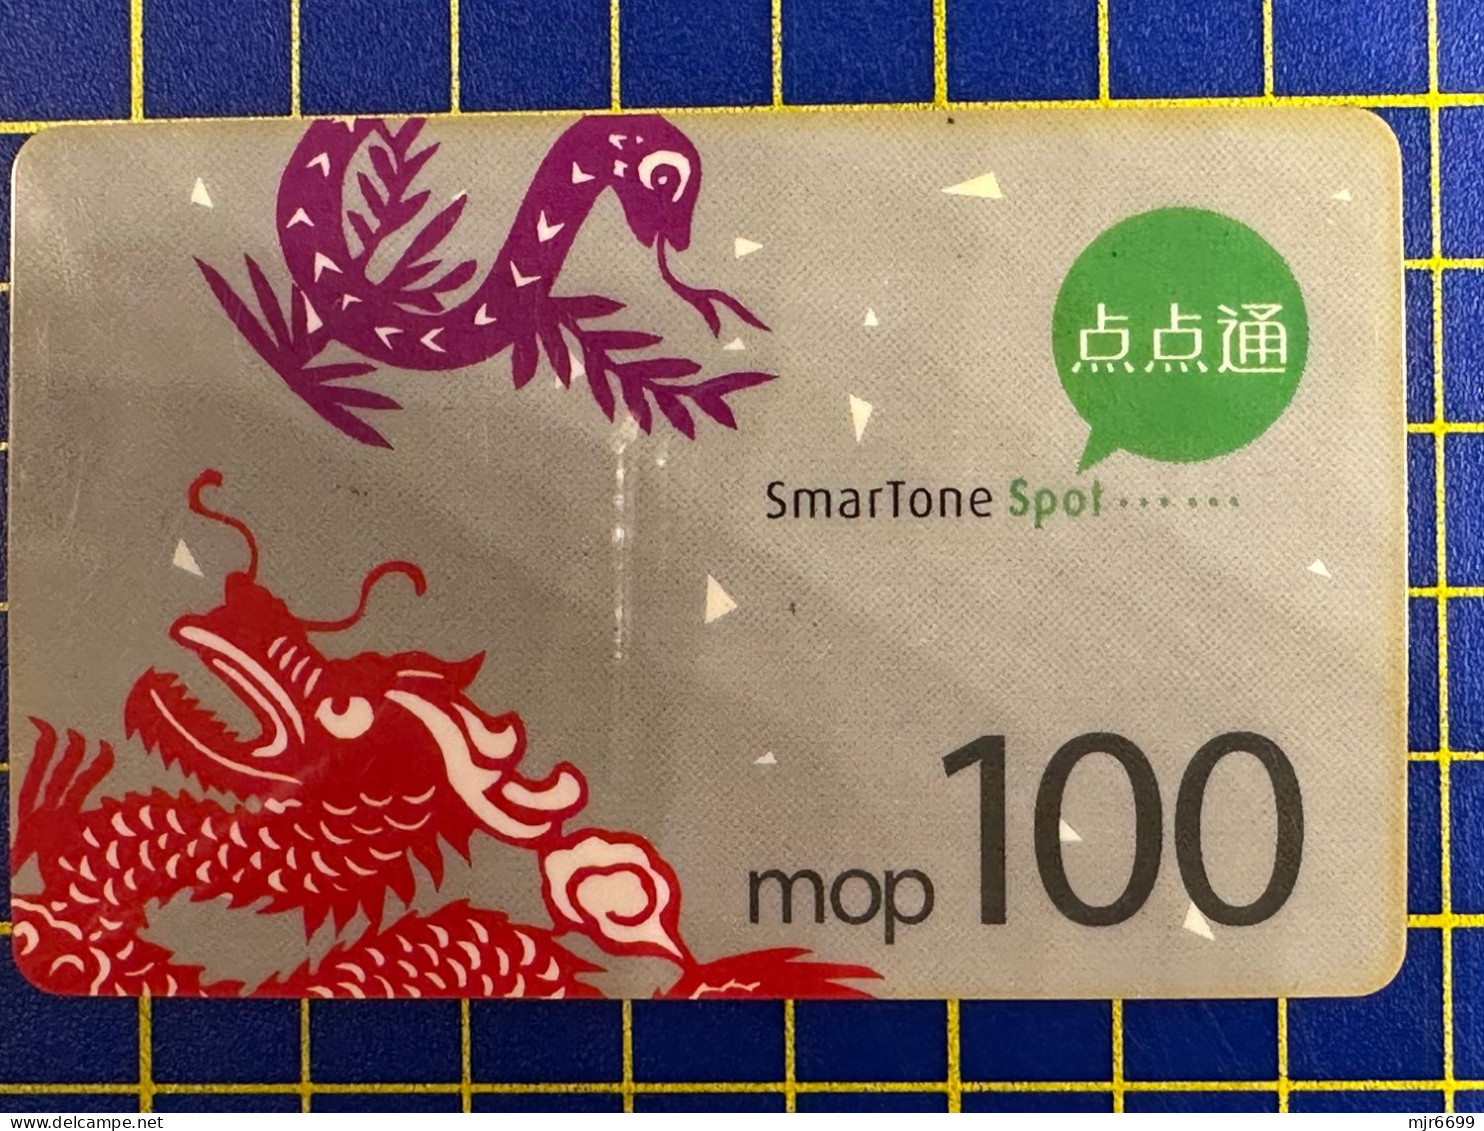 MACAU CHINESE LUNAR NEW YEAR OF THE DRAGON + SNAKE PHONE CARD VERY FINE AND CLEAN USED - Macao